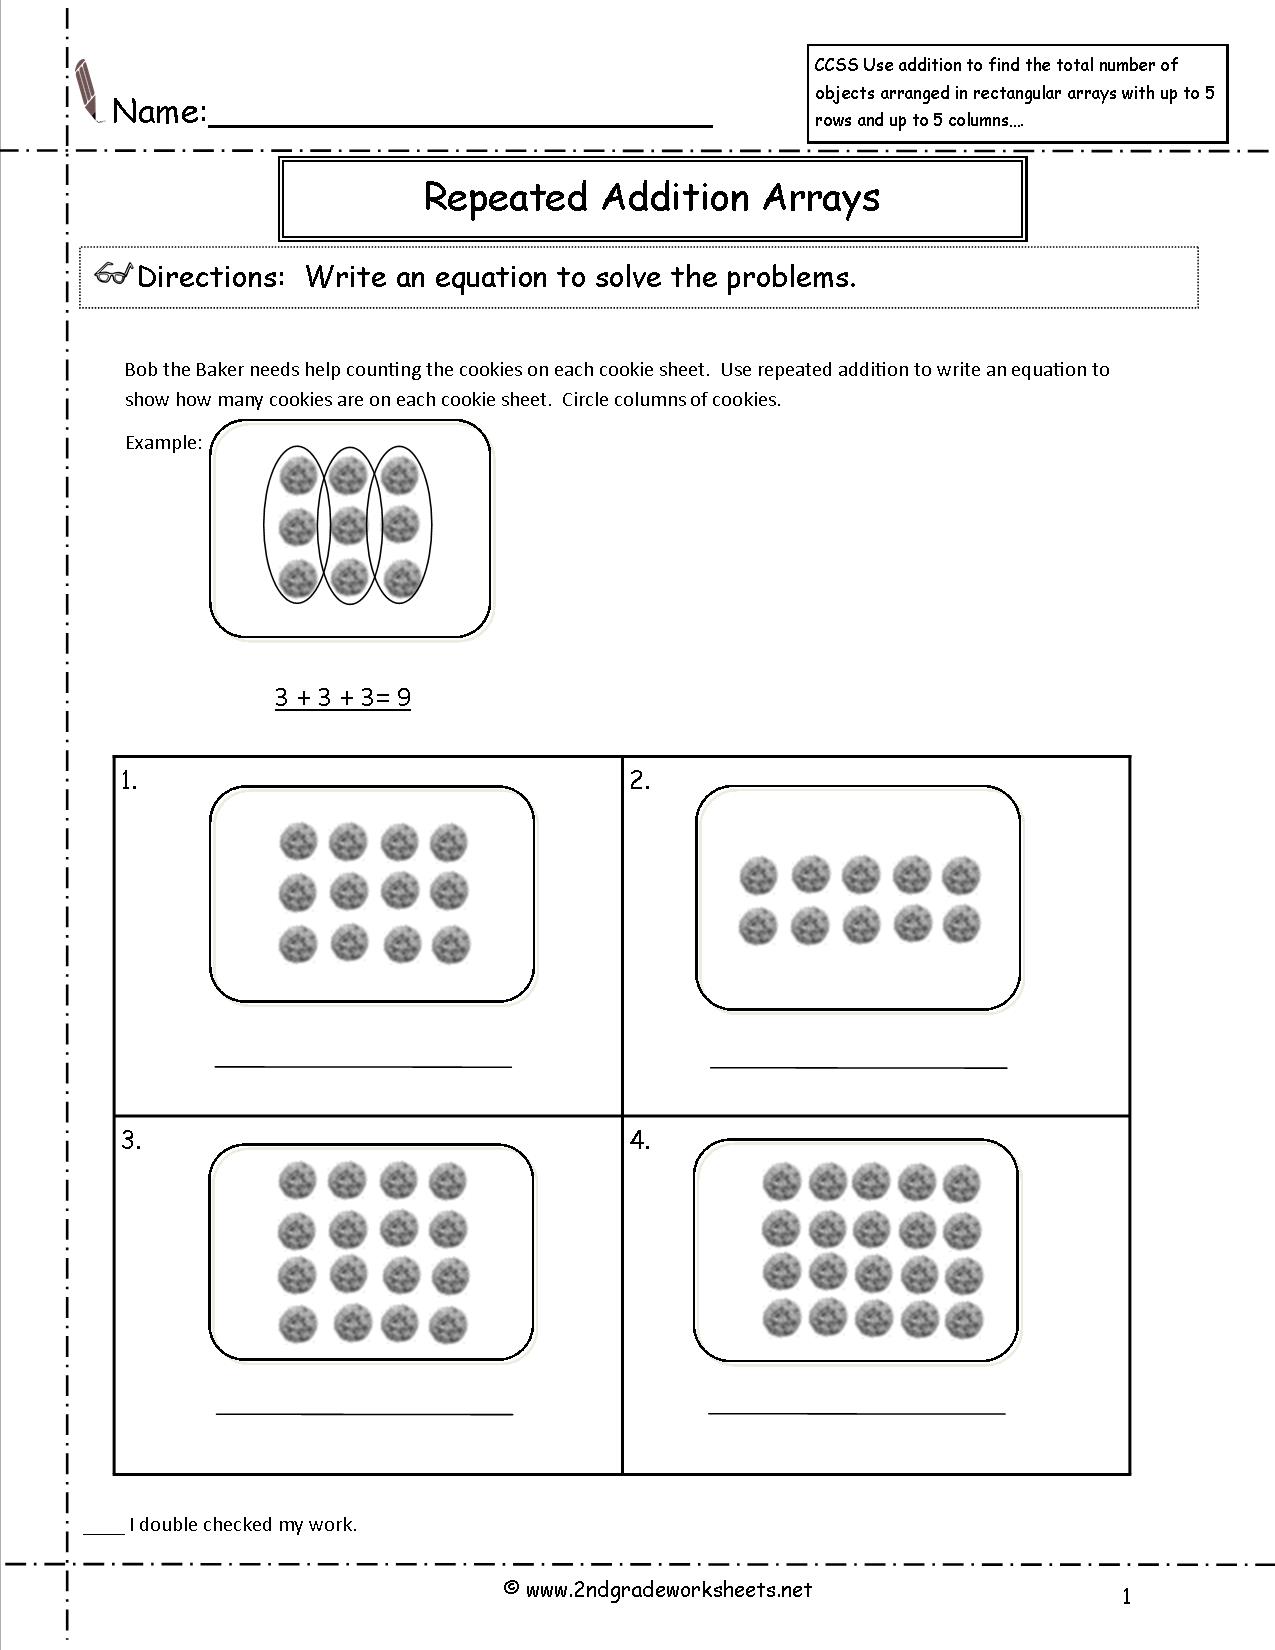 Repeated Addition Arrays Printable Worksheets Image